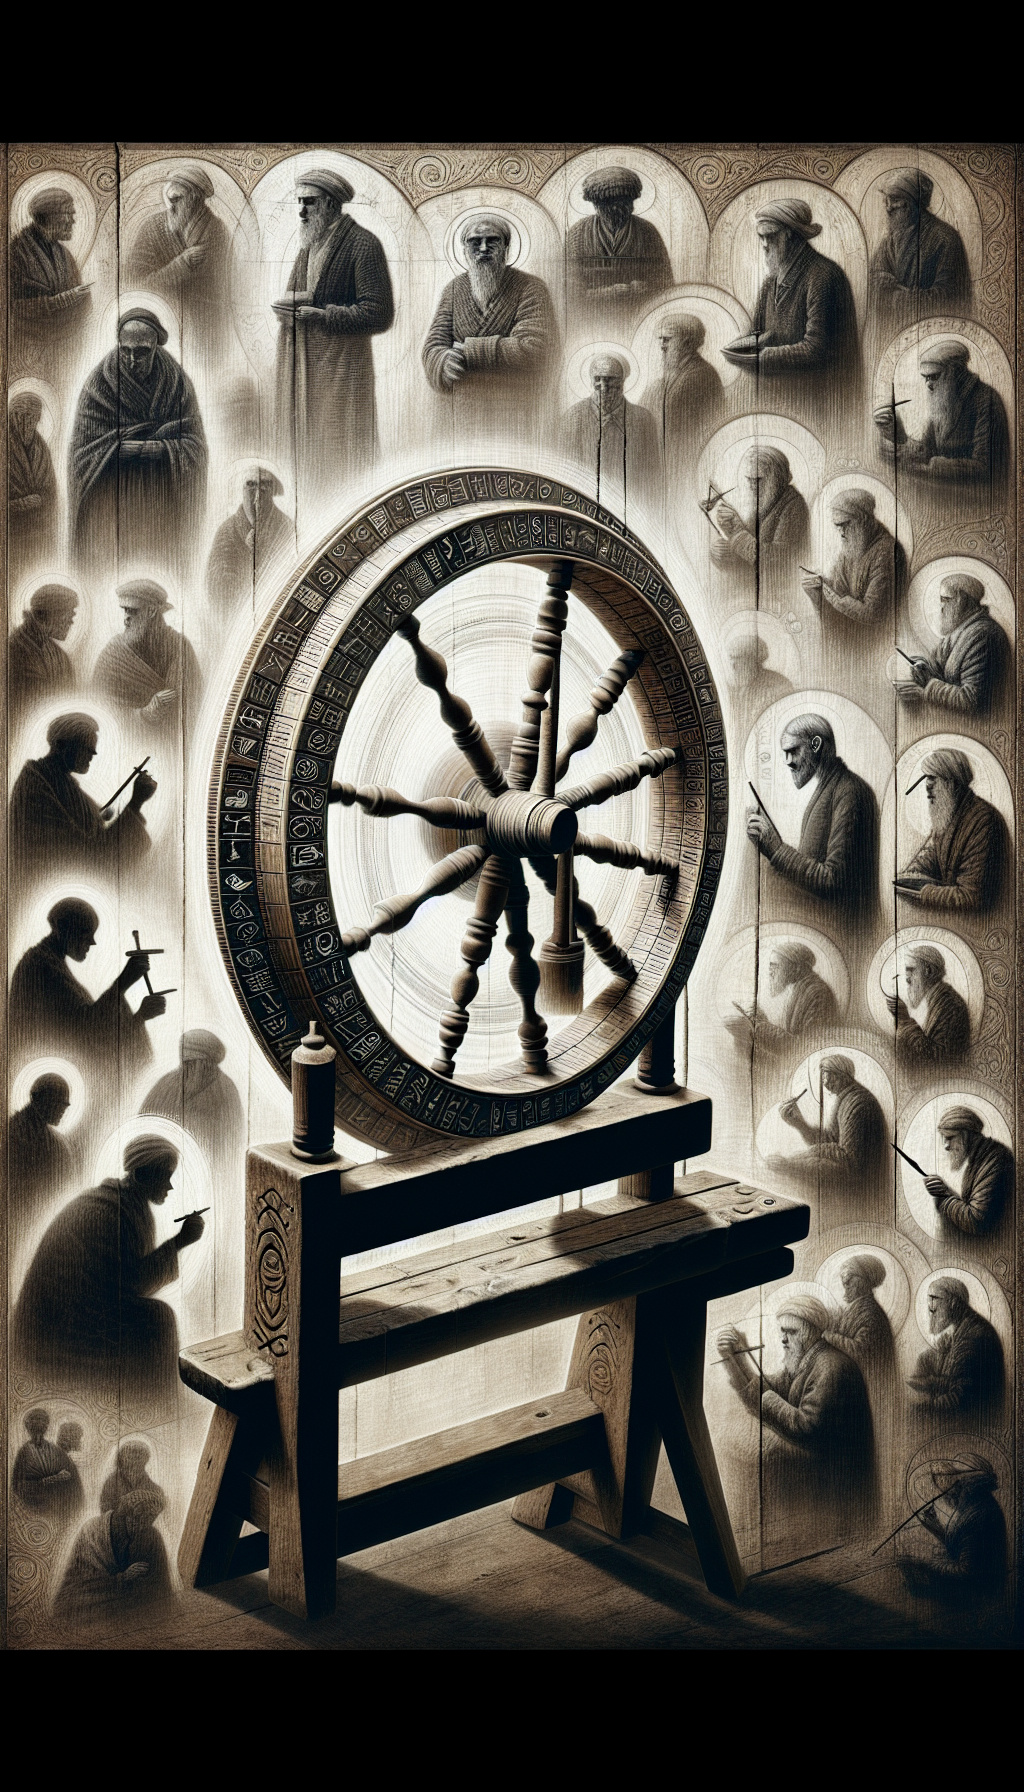 The illustration depicts an antique spinning wheel with distinct maker’s marks and signatures intricately carved into its wooden frame. Shadowy figures of historical artisans hover around it, etching their unique symbols. The style shifts from detailed realism on the spinning wheel to ghostly abstract outlines for the artisans, highlighting the melding of tangible history and the mystery of its creators.